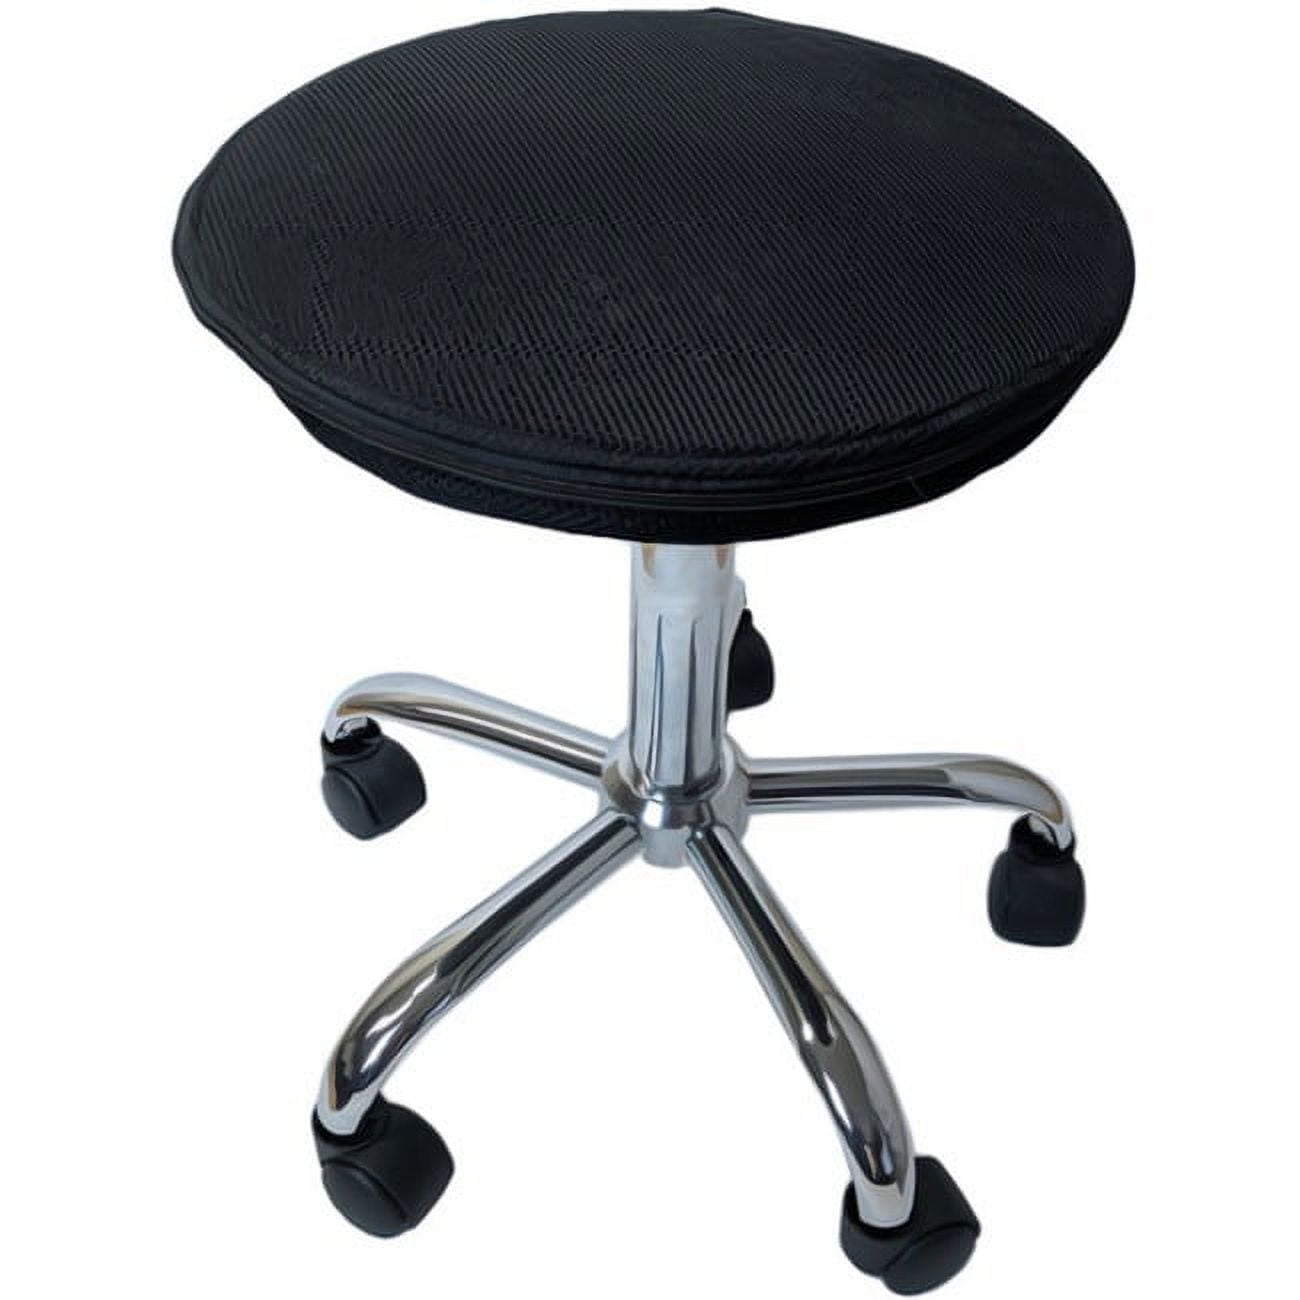  Wobble Stool Air balance ball chair on wheels alternative  rolling stool with wheels flexible seating classroom stools standing desk  stool yoga ball chair adhd chair wobble stools for classroom seating 